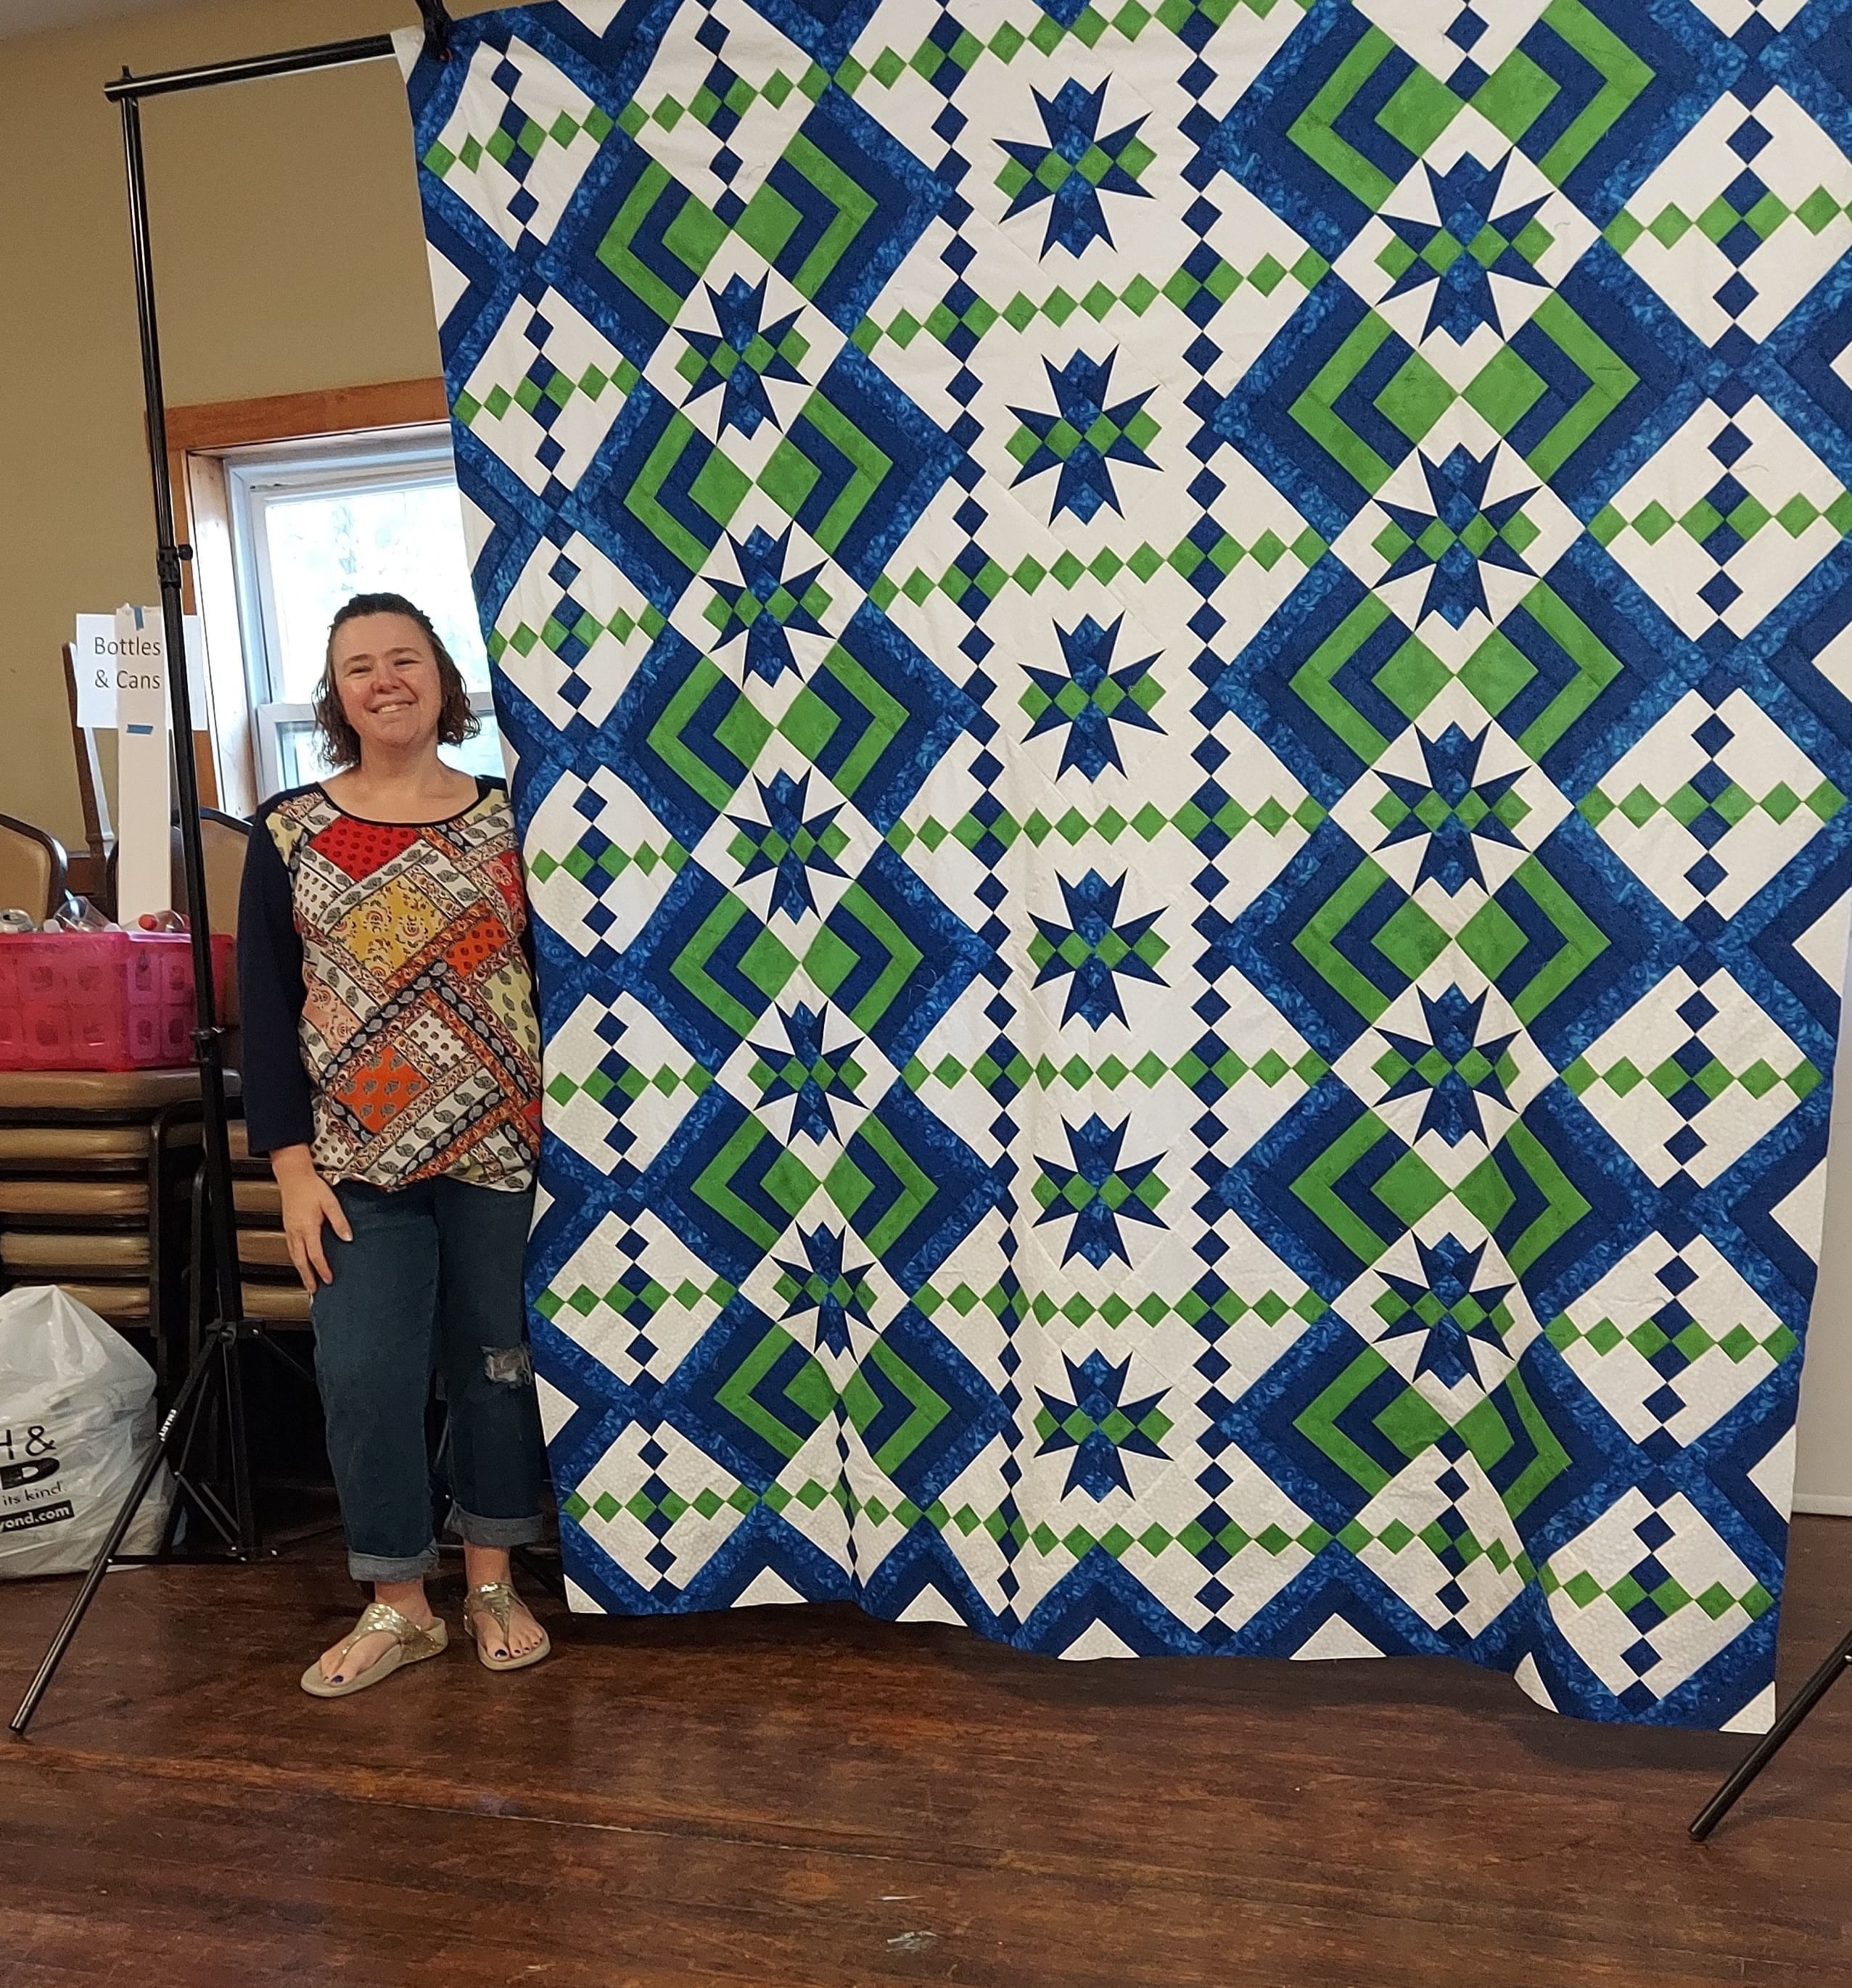 Aimee Yorsaner standing next to large quilt